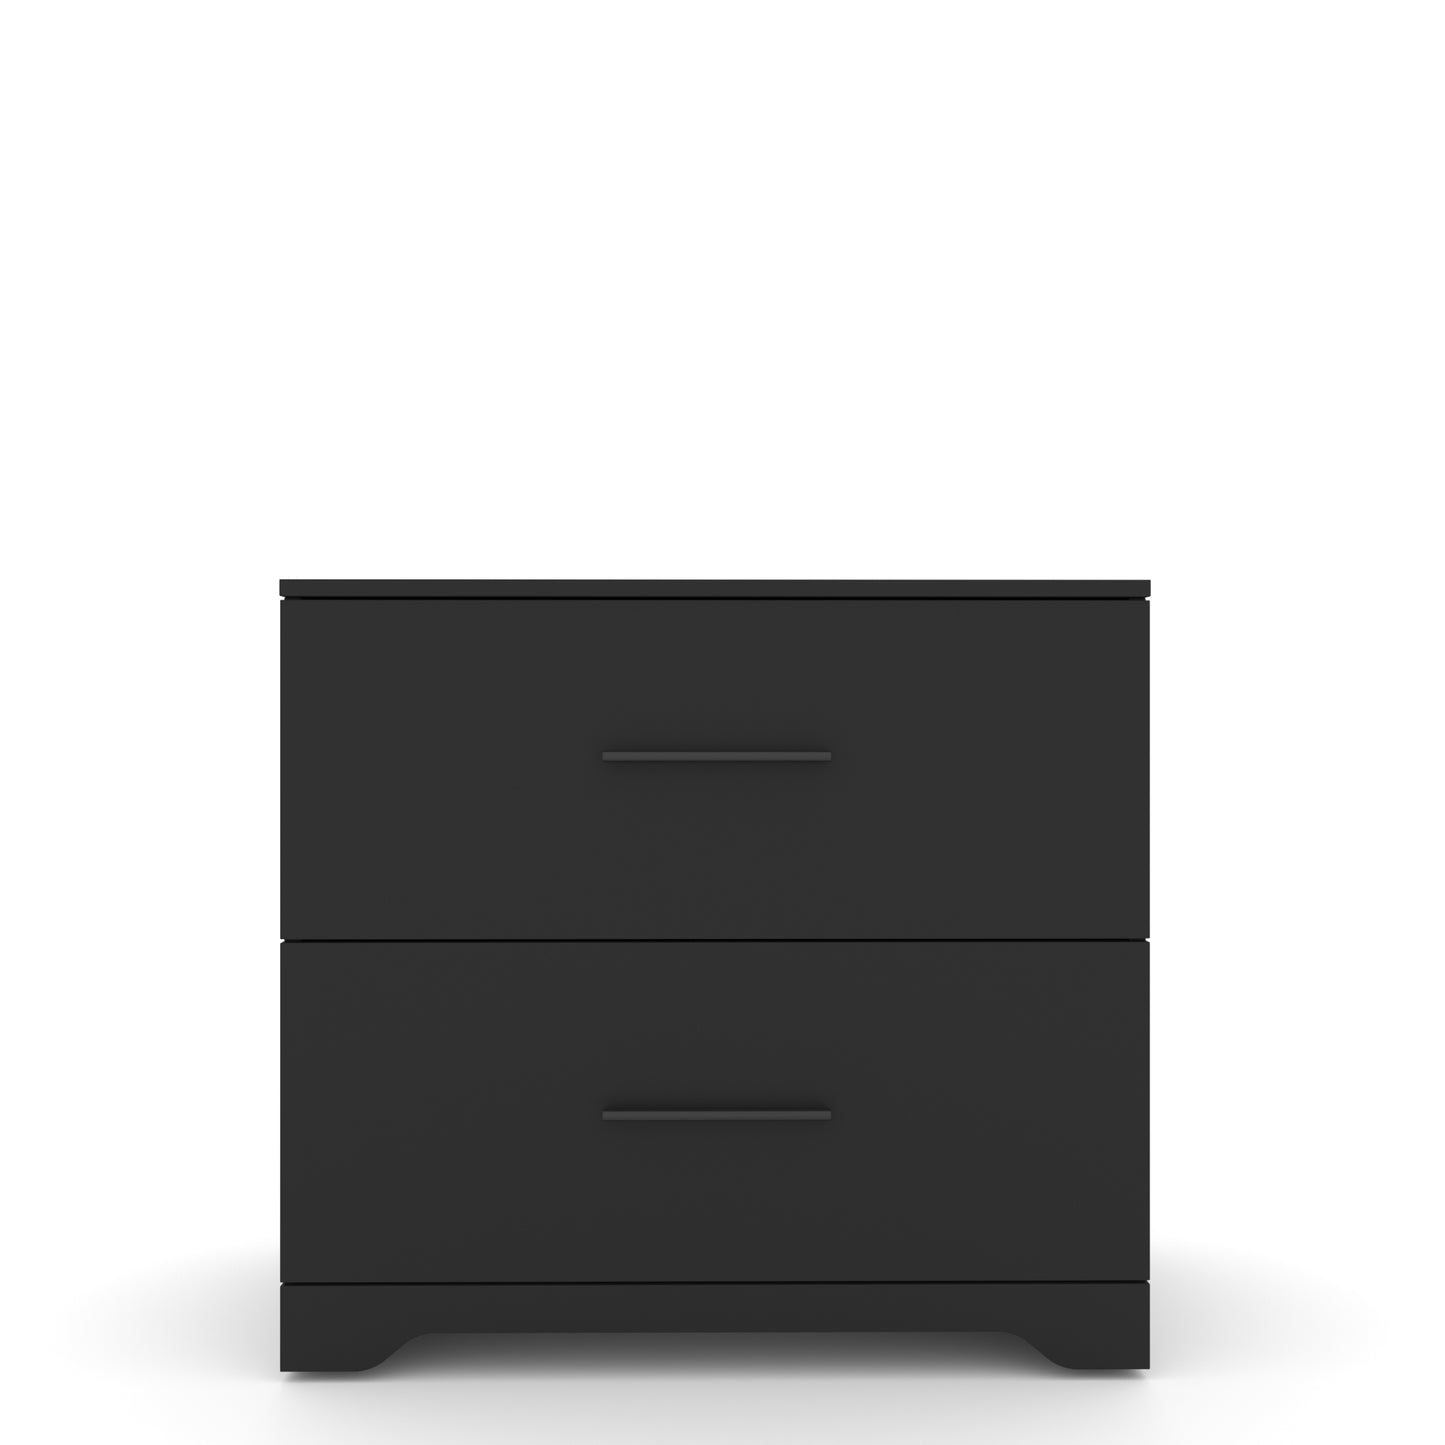 2 -Drawer Lateral Filing Cabinet,Storage Filing Cabinet for Home Office, Black